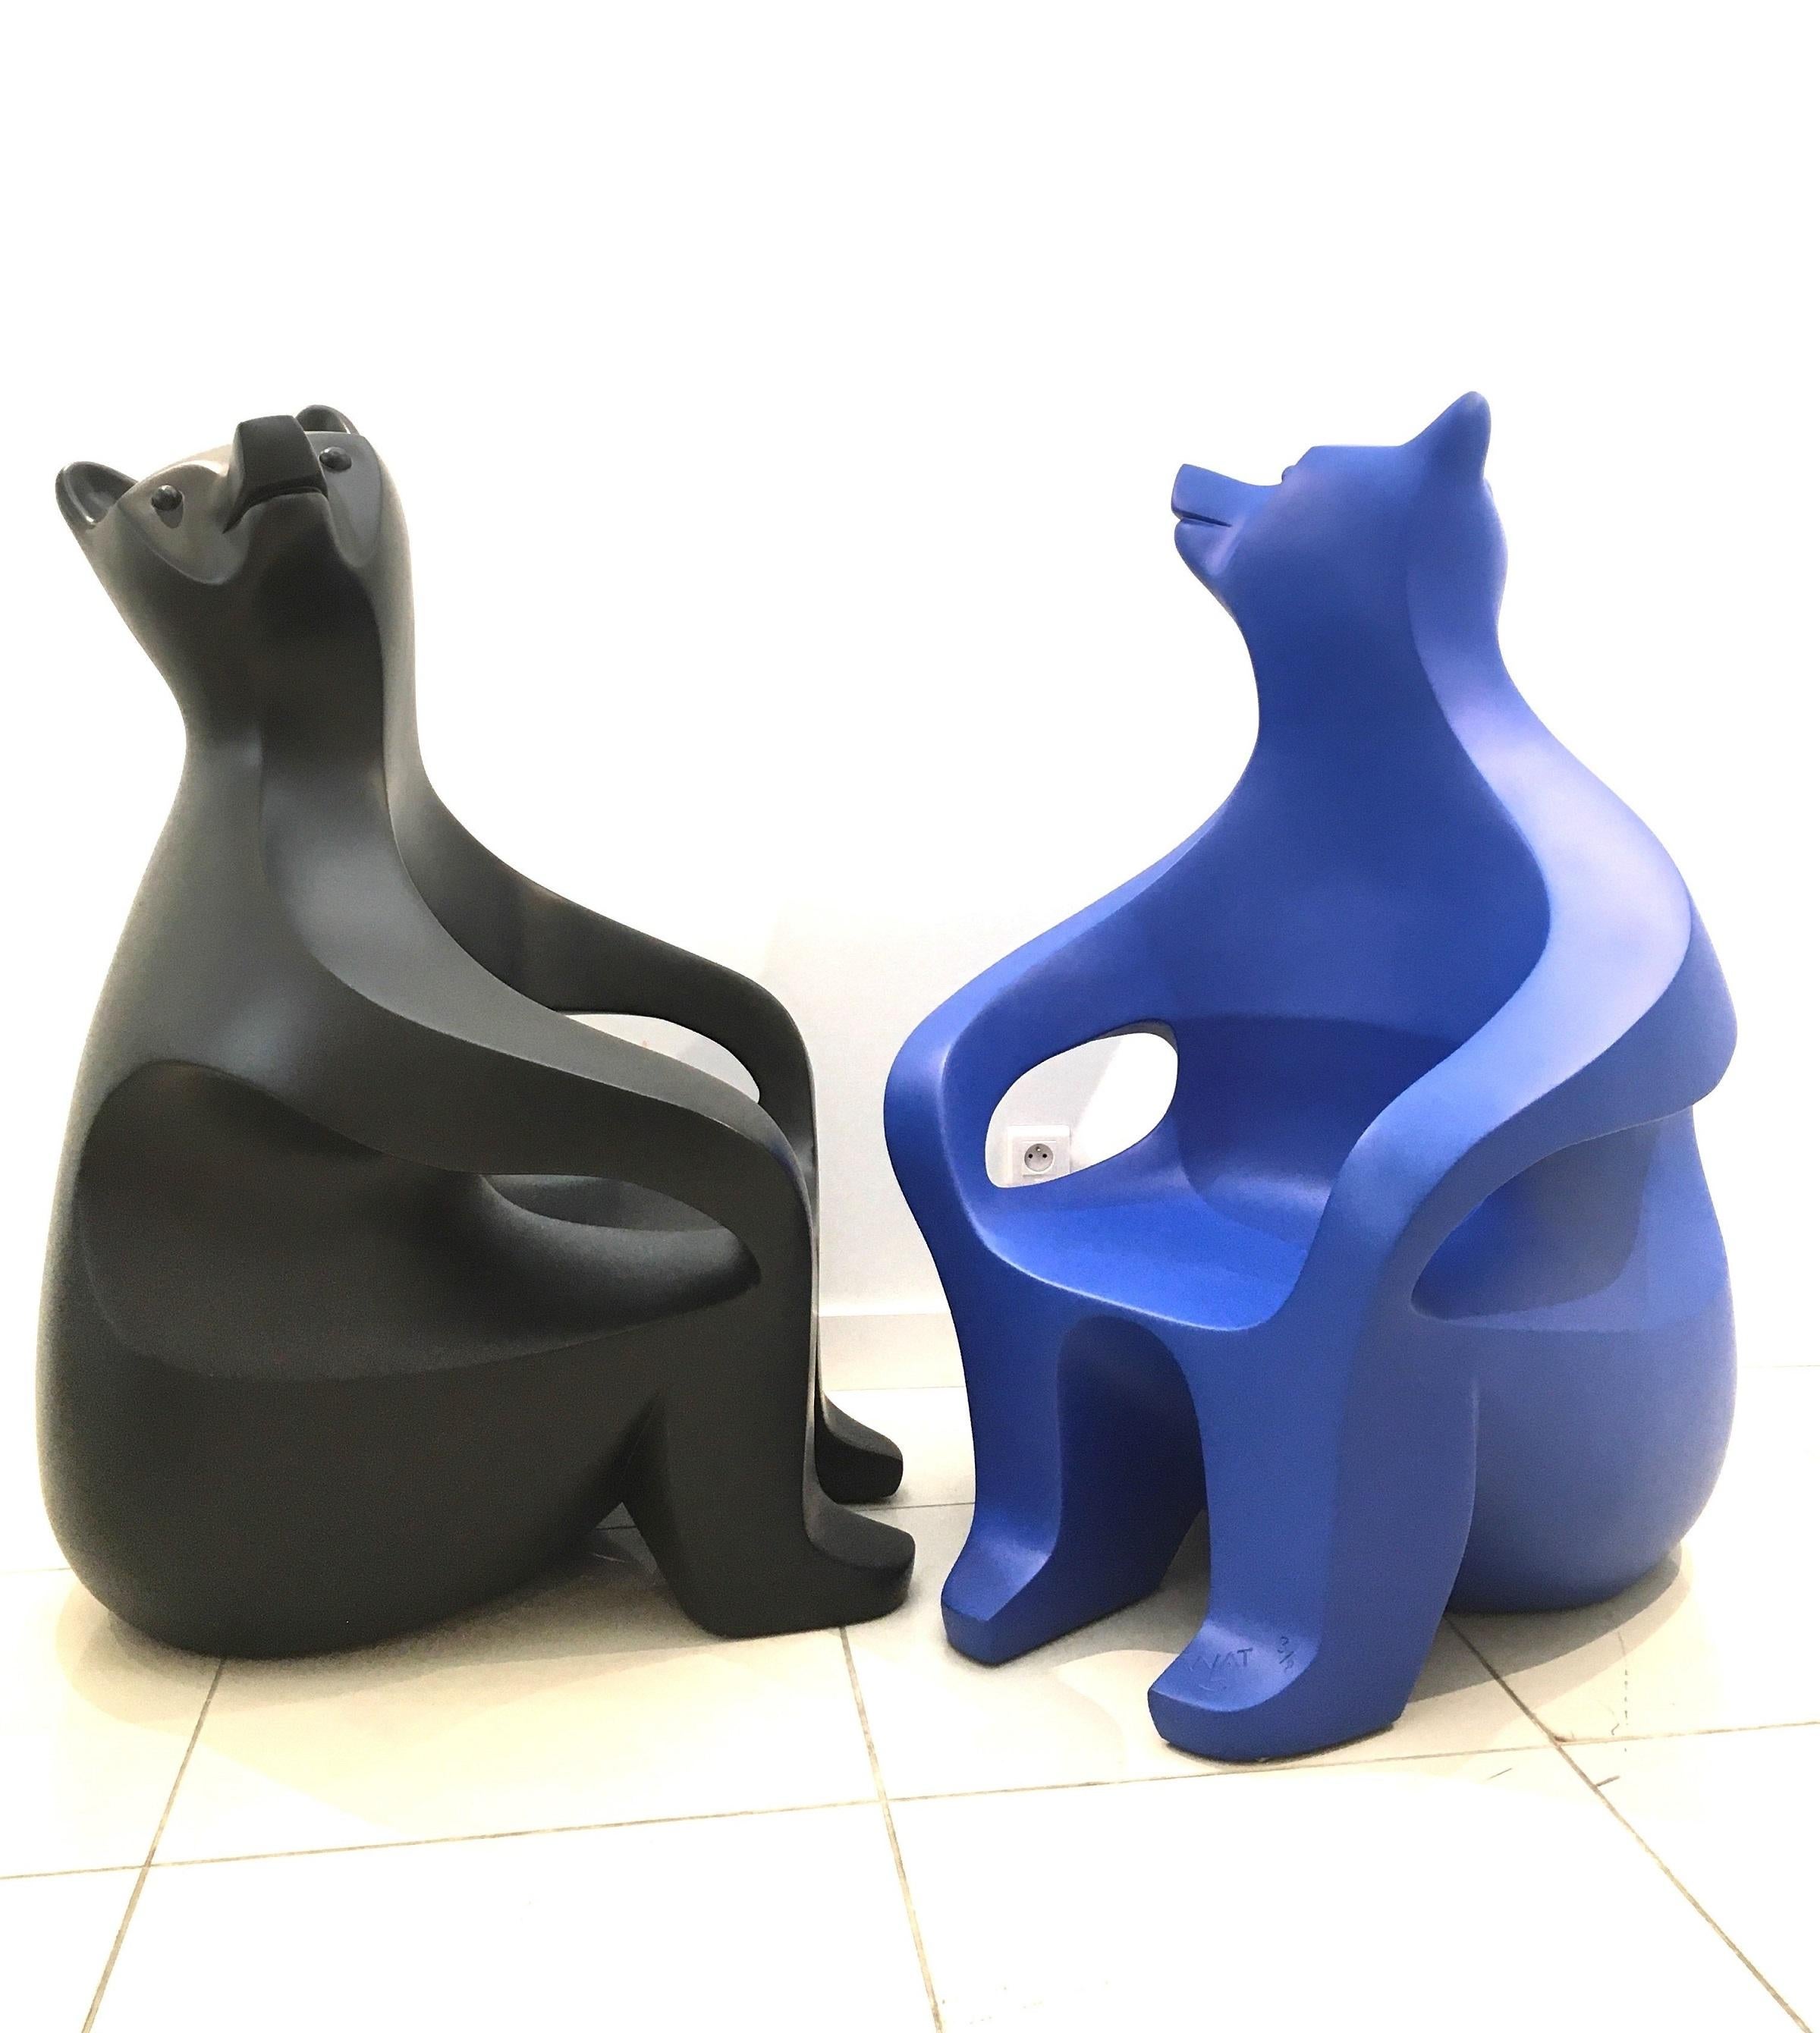 Polyester sculpture, 2019. 130 cm × 80 cm × 90 cm. This functional sculpture of wild cat can be used as an armchair.
Available colors: black, red, blue and white.
Limited edition of 8 + 4 artist’s proofs. 